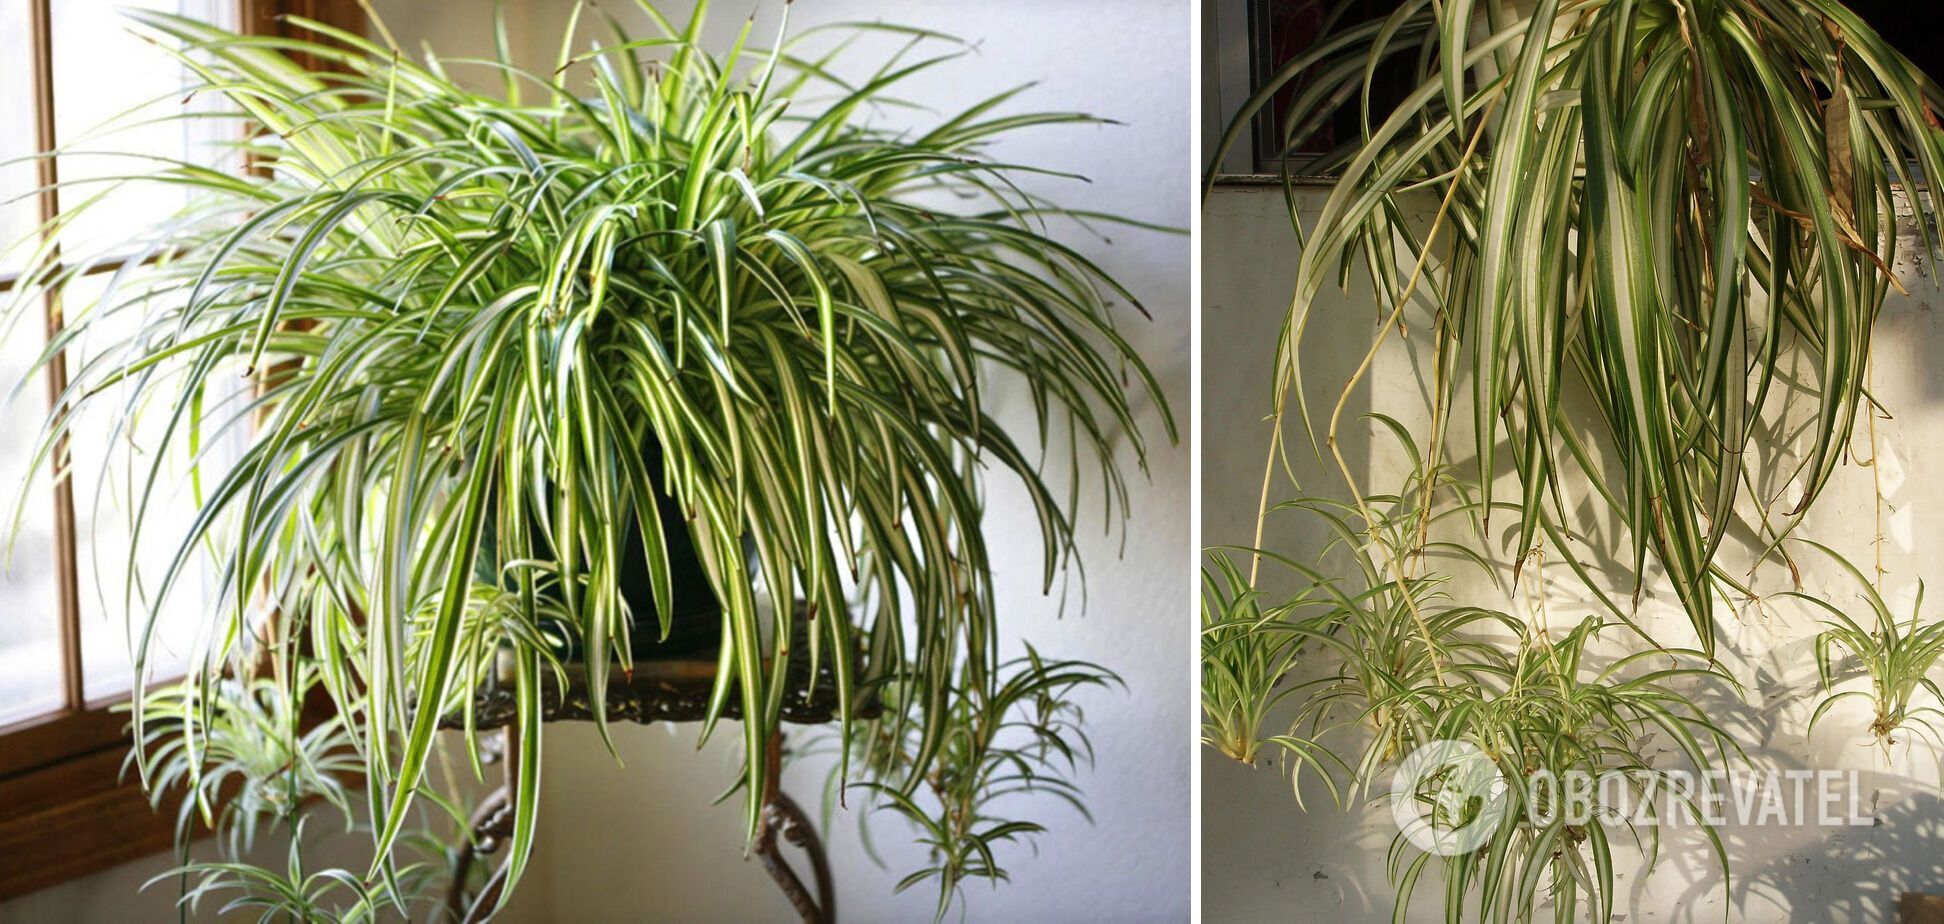 Totally transform your room: which indoor flowers are best for hanging planters